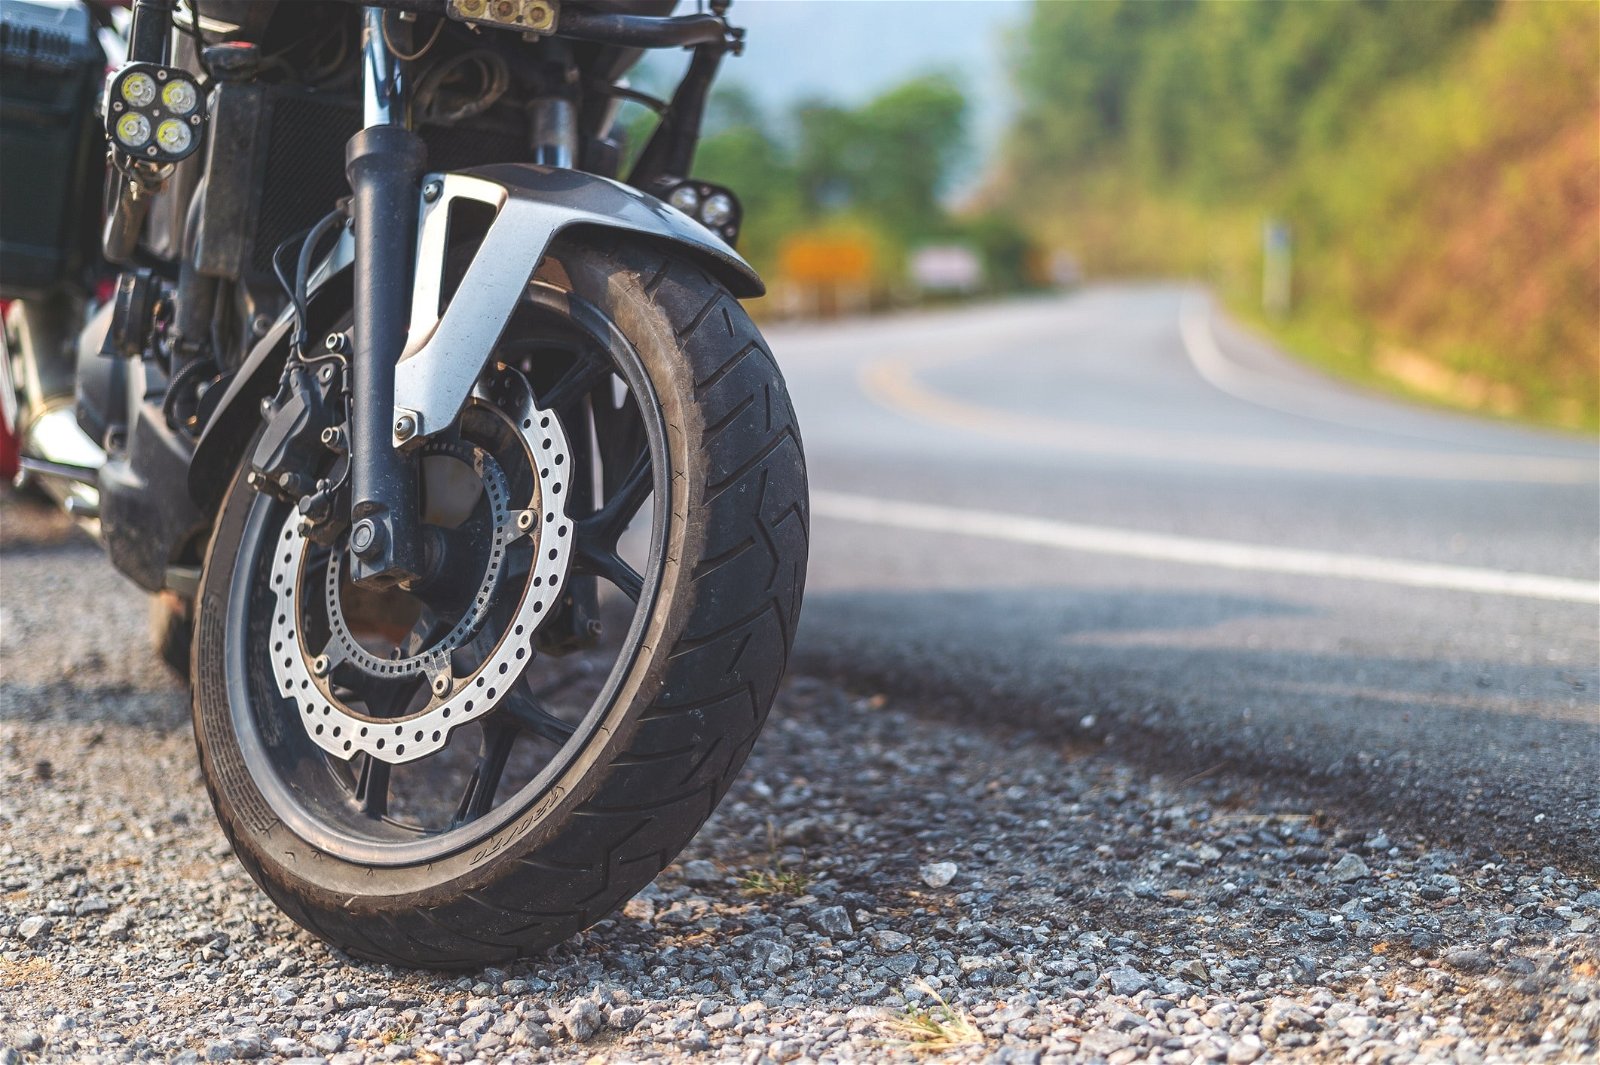 Motorcycle Accident in South Carolina